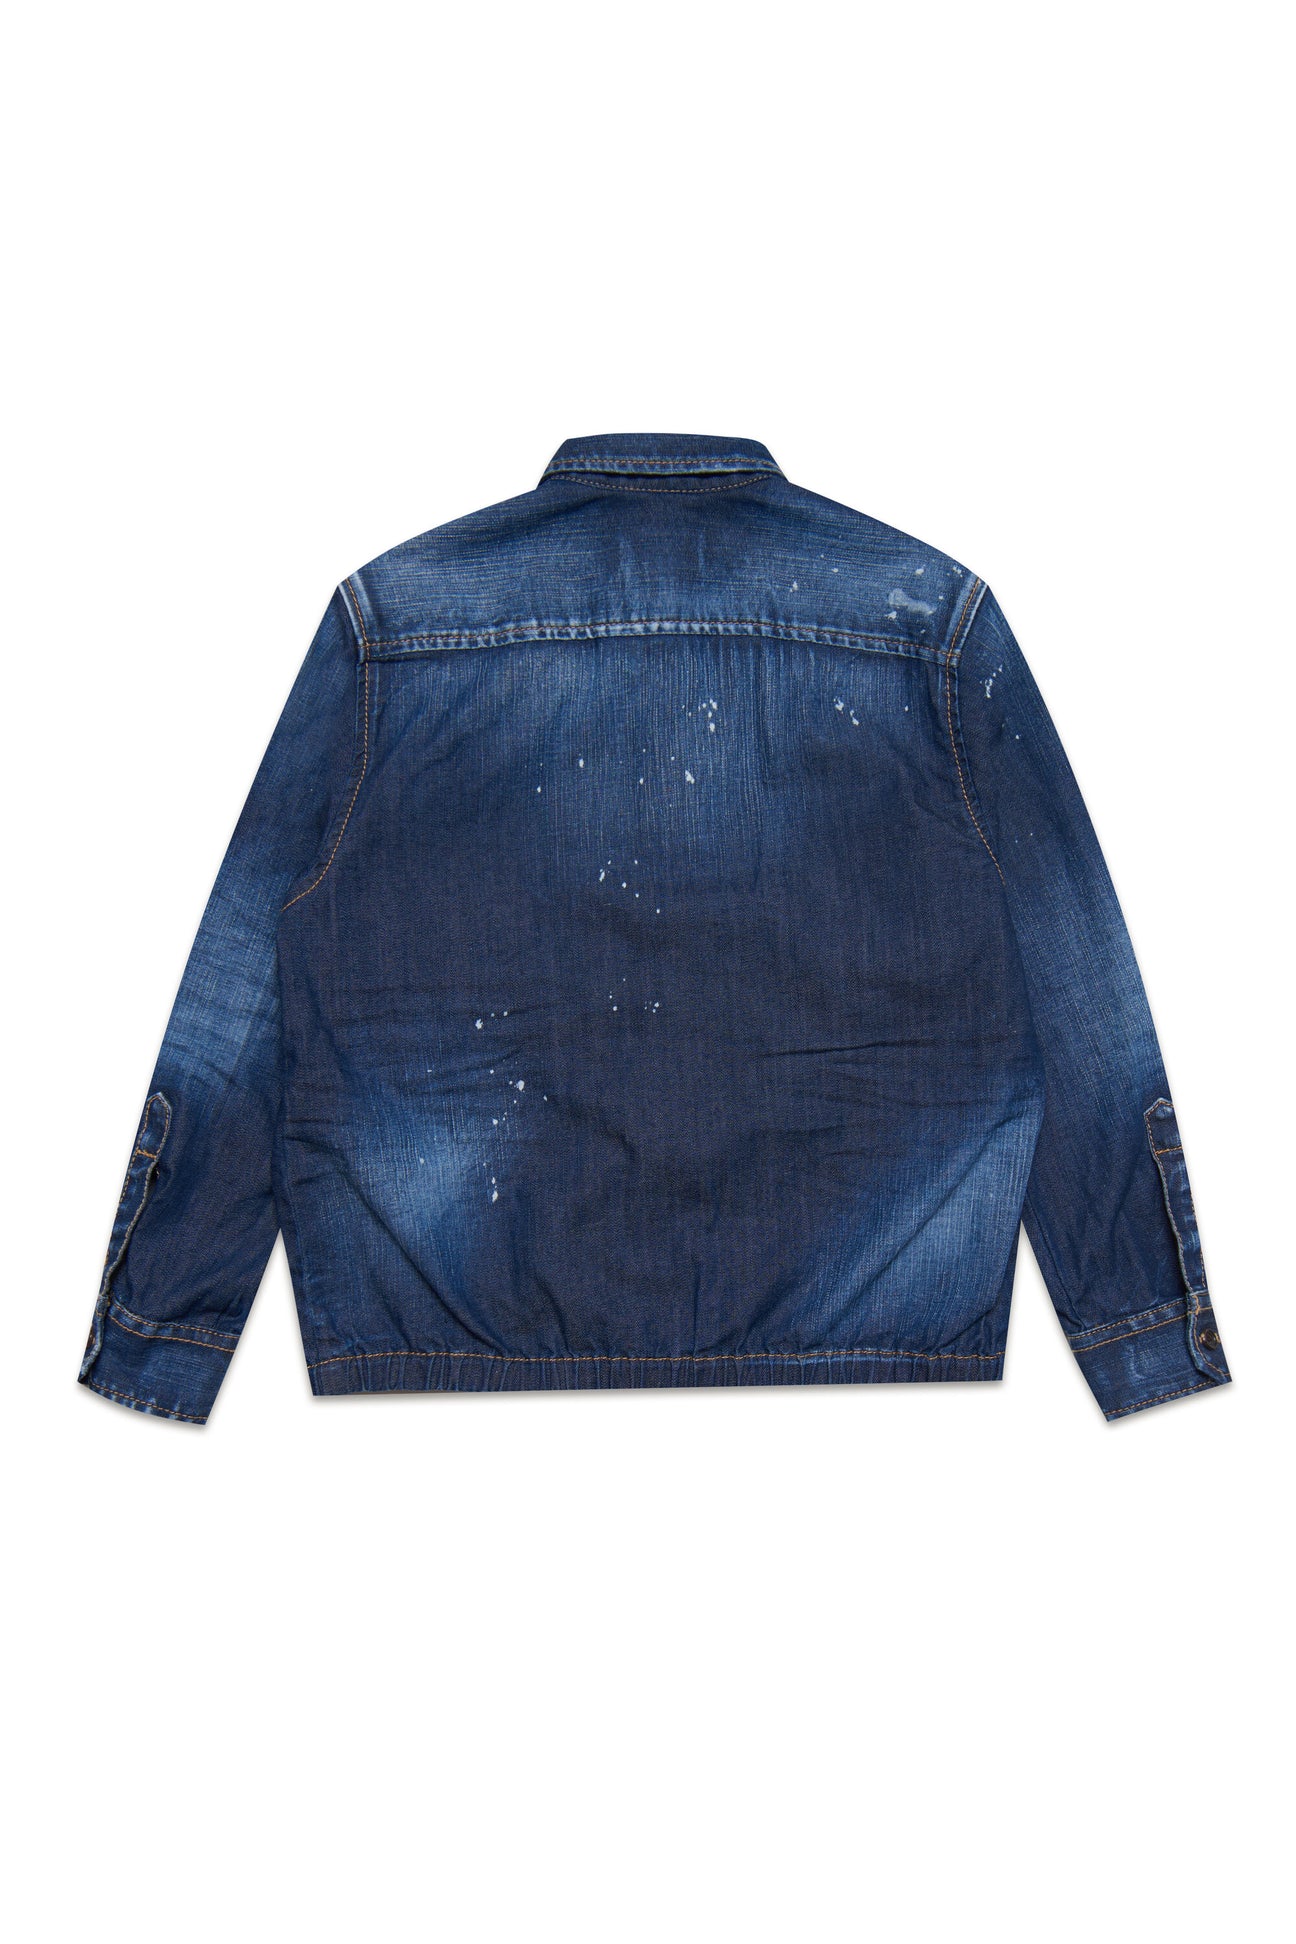 Shaded blue denim shirt with abrasions and stains Shaded blue denim shirt with abrasions and stains